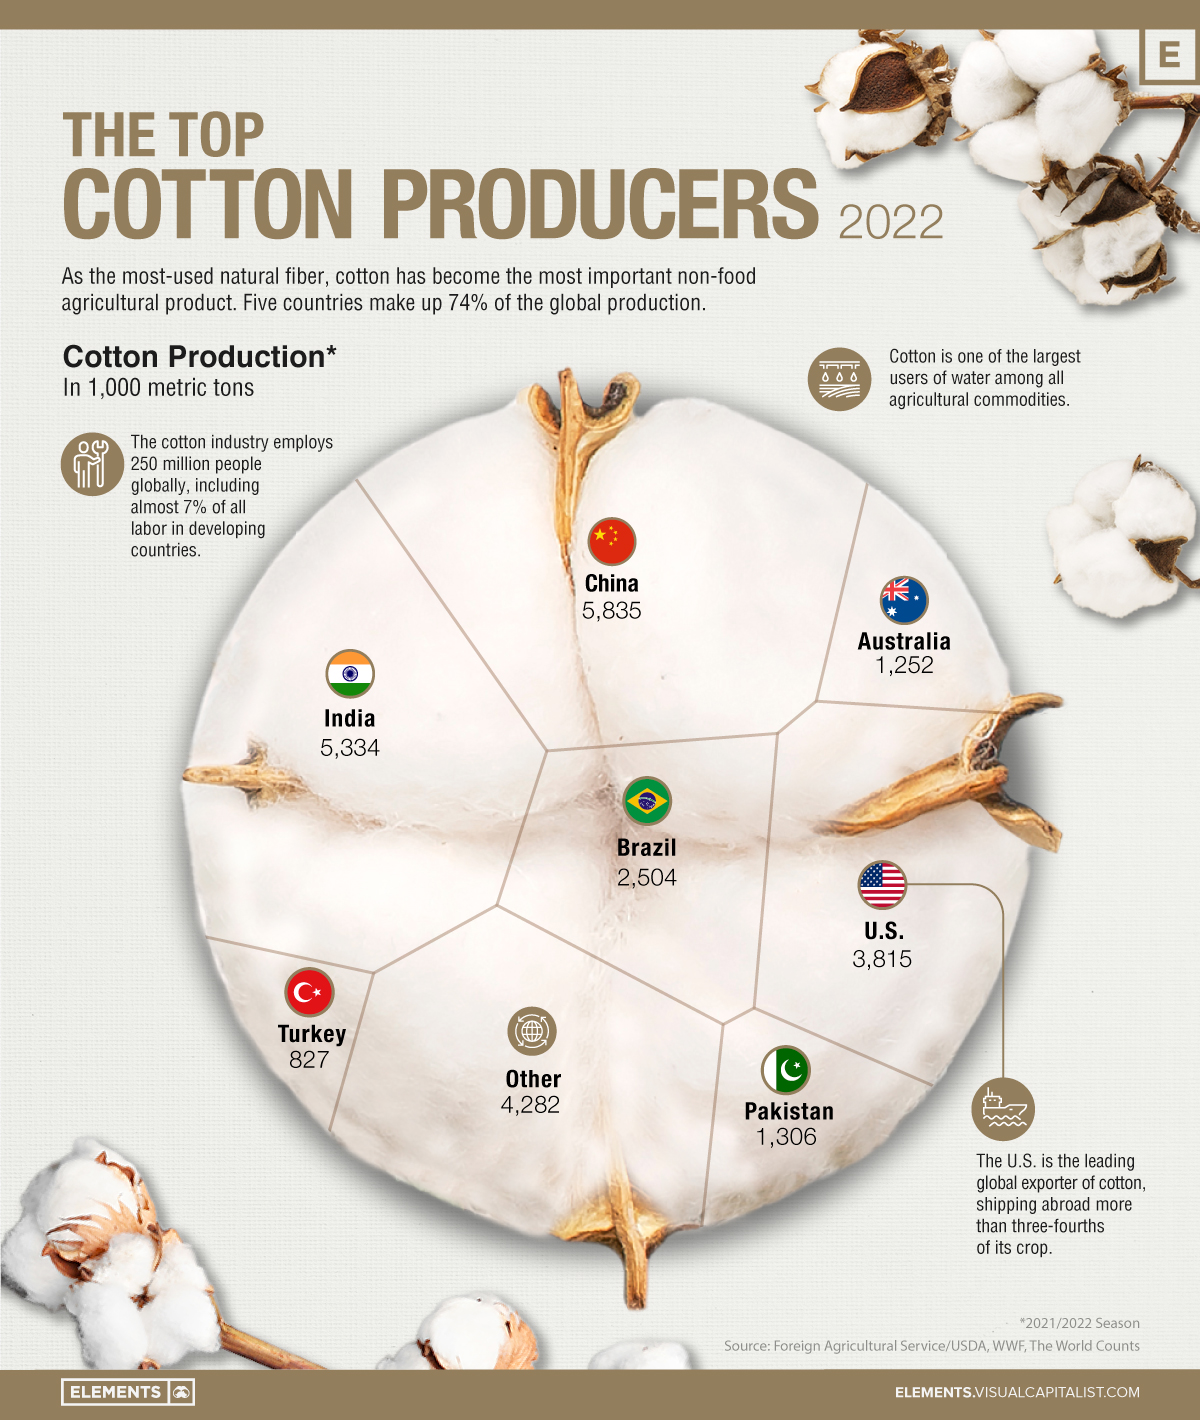 Ranked: The World's Top Cotton Producers